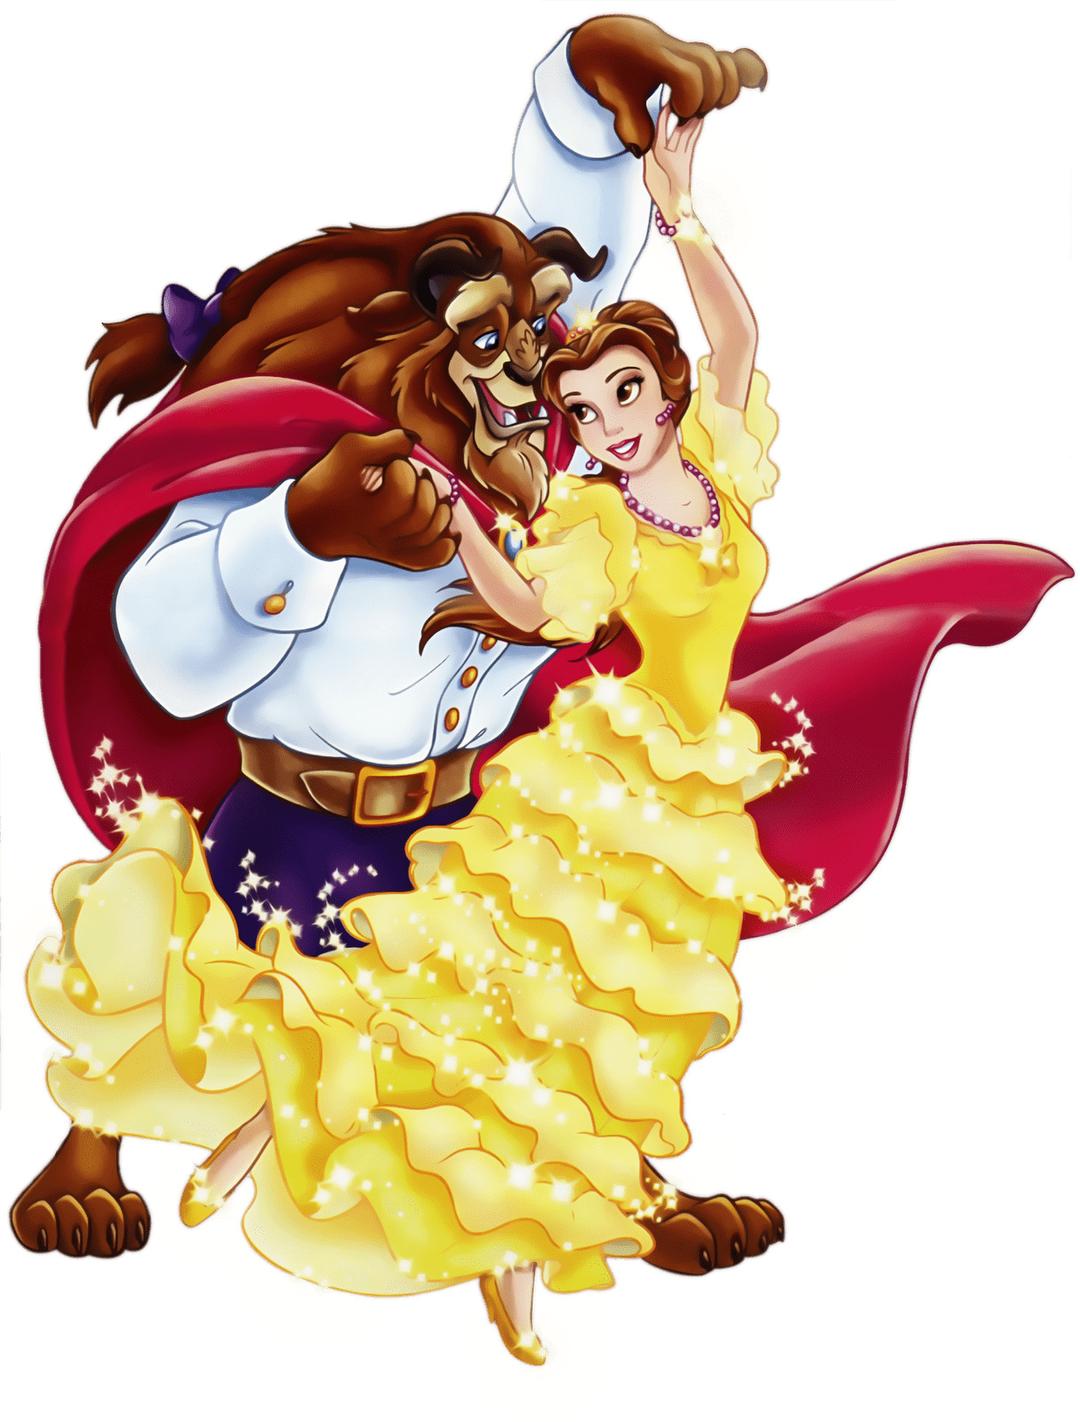 Belle Dancing With the Beast png transparent